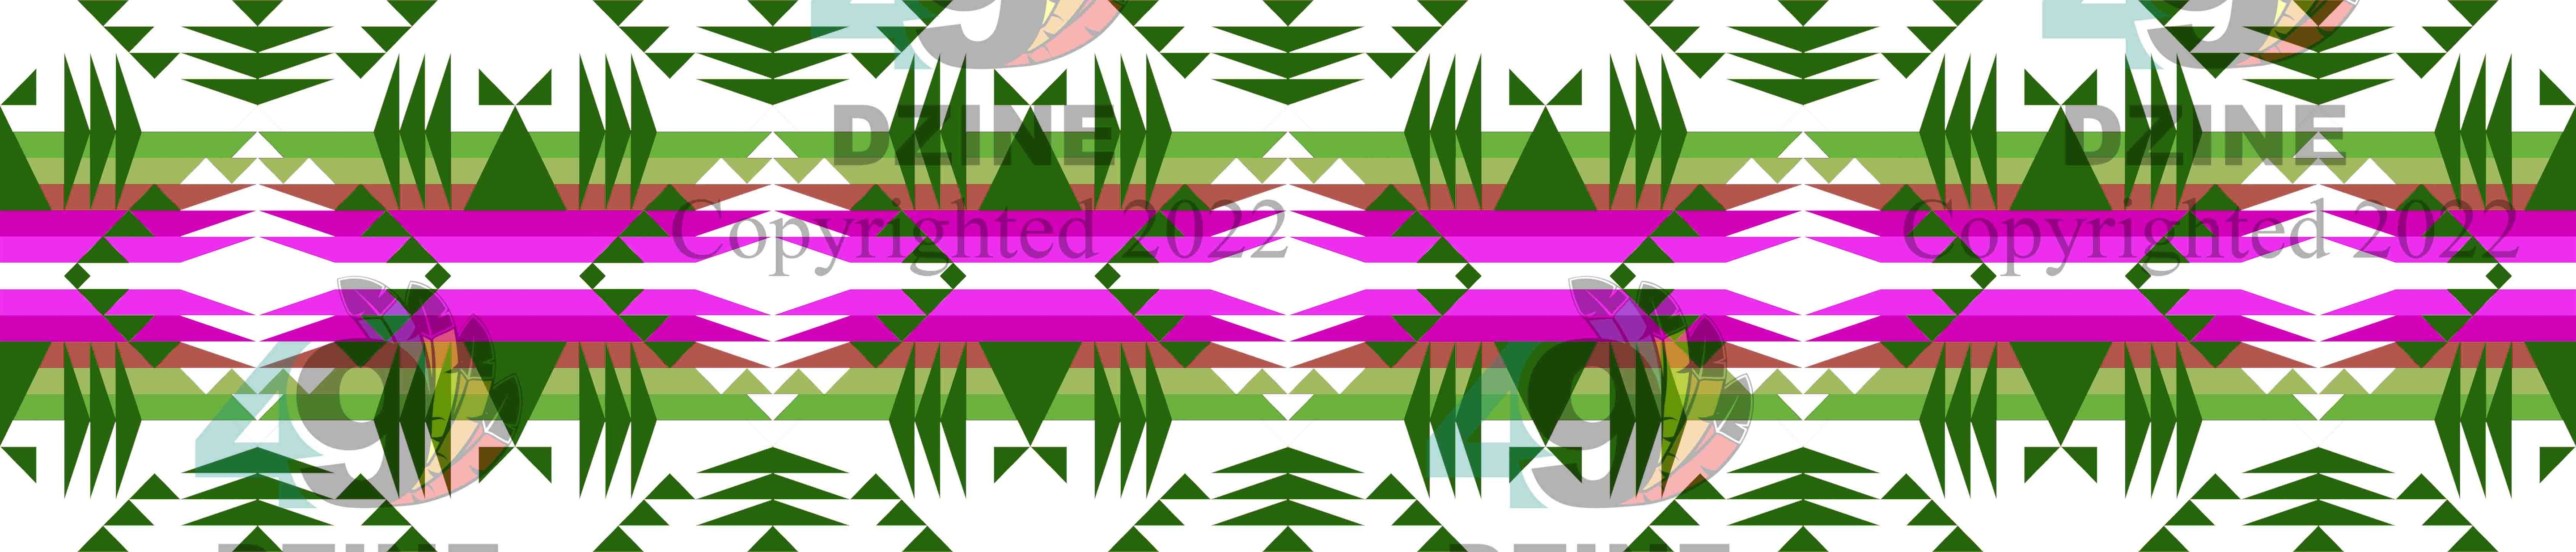 11-inch Geometric Transfer Between the Mountains Strip Transfers 49 Dzine Between the Mountains Strip Forest 